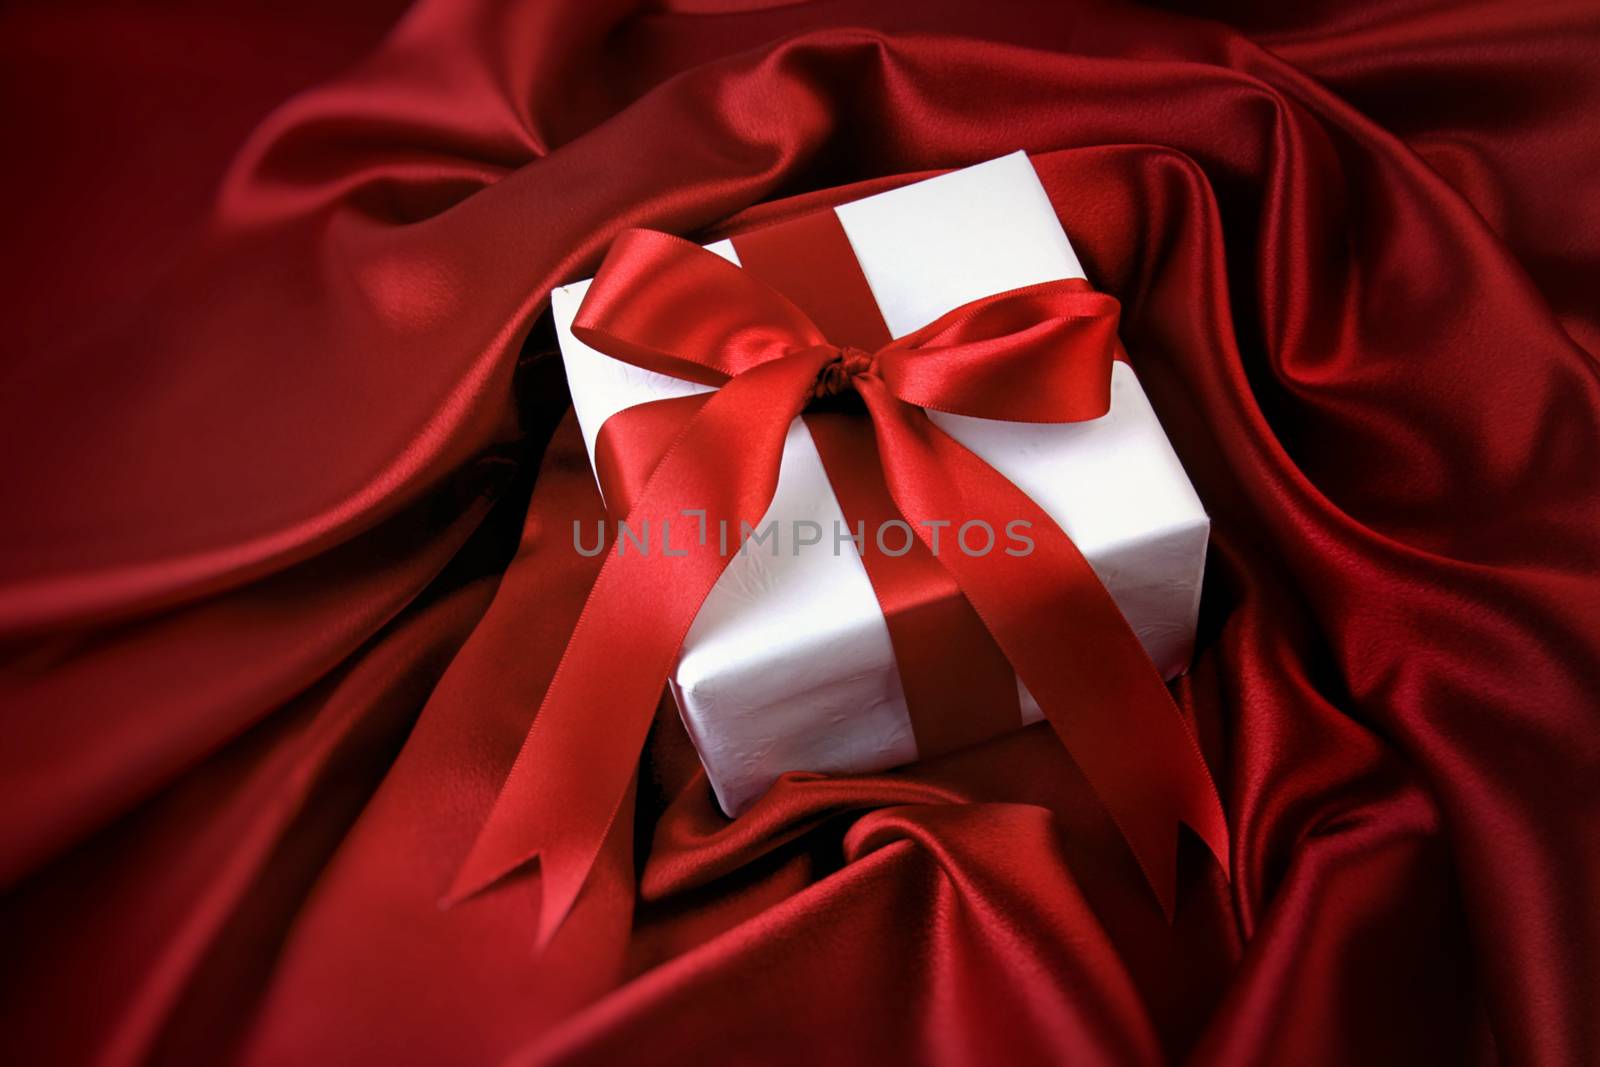 Small valentine gift on red satin by Sandralise